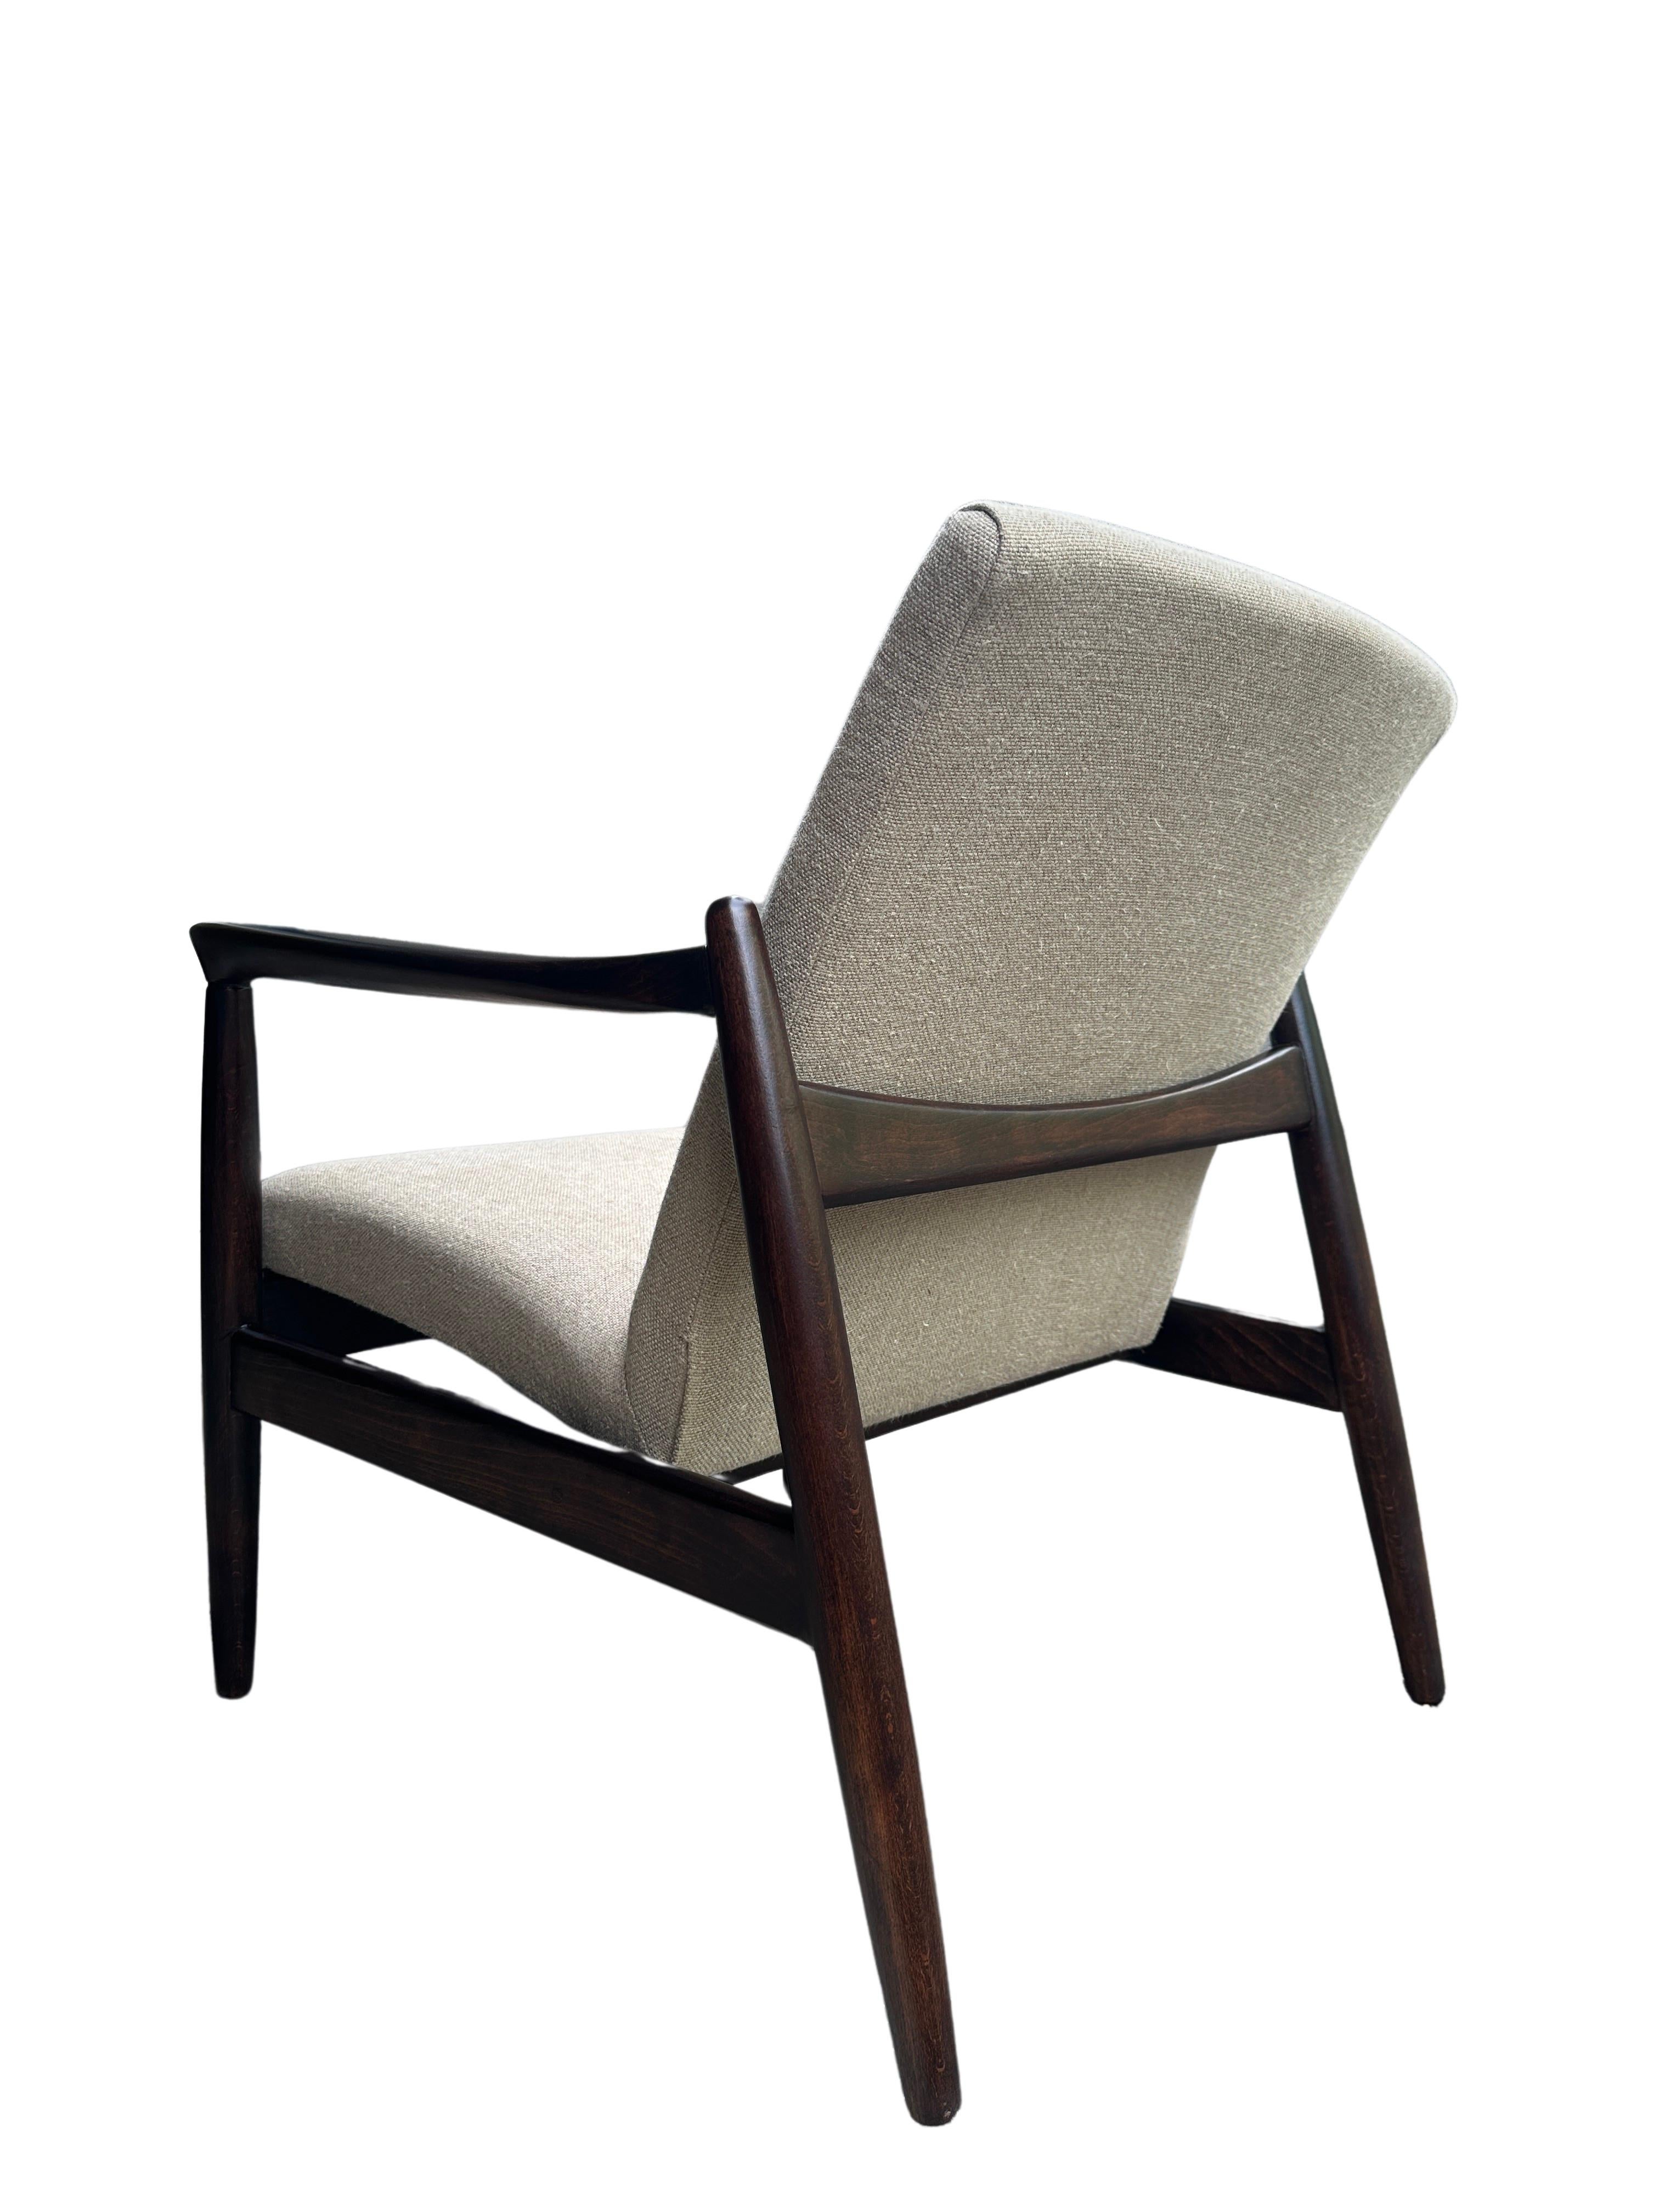 Hand-Crafted Pair of Mid Century Pure Linen GFM-64 Armchairs by Edmund Homa, 1960s For Sale